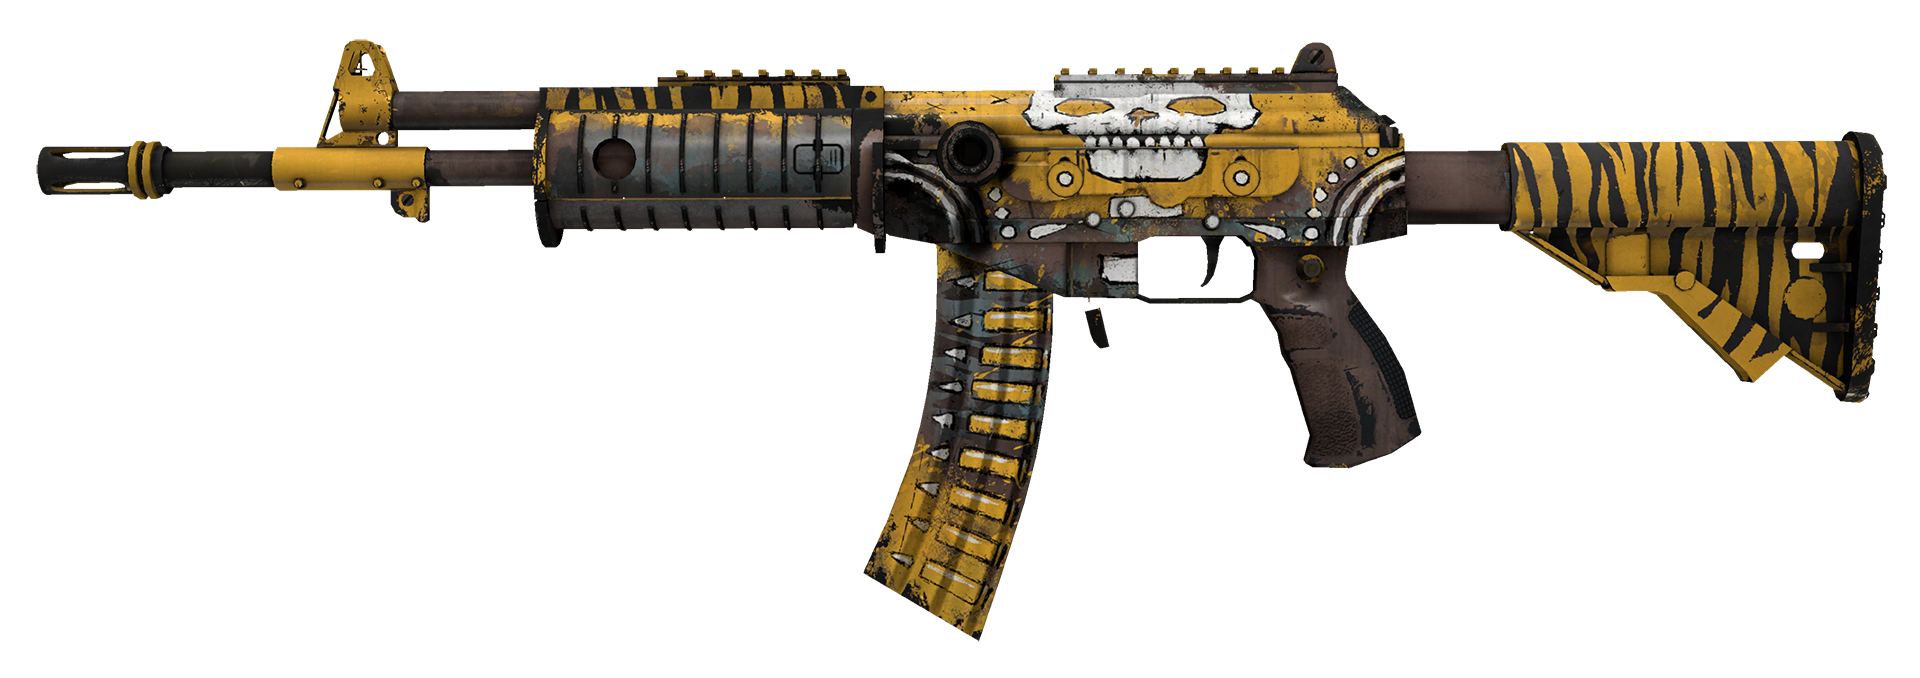 Galil AR Chatterbox Large Rendering